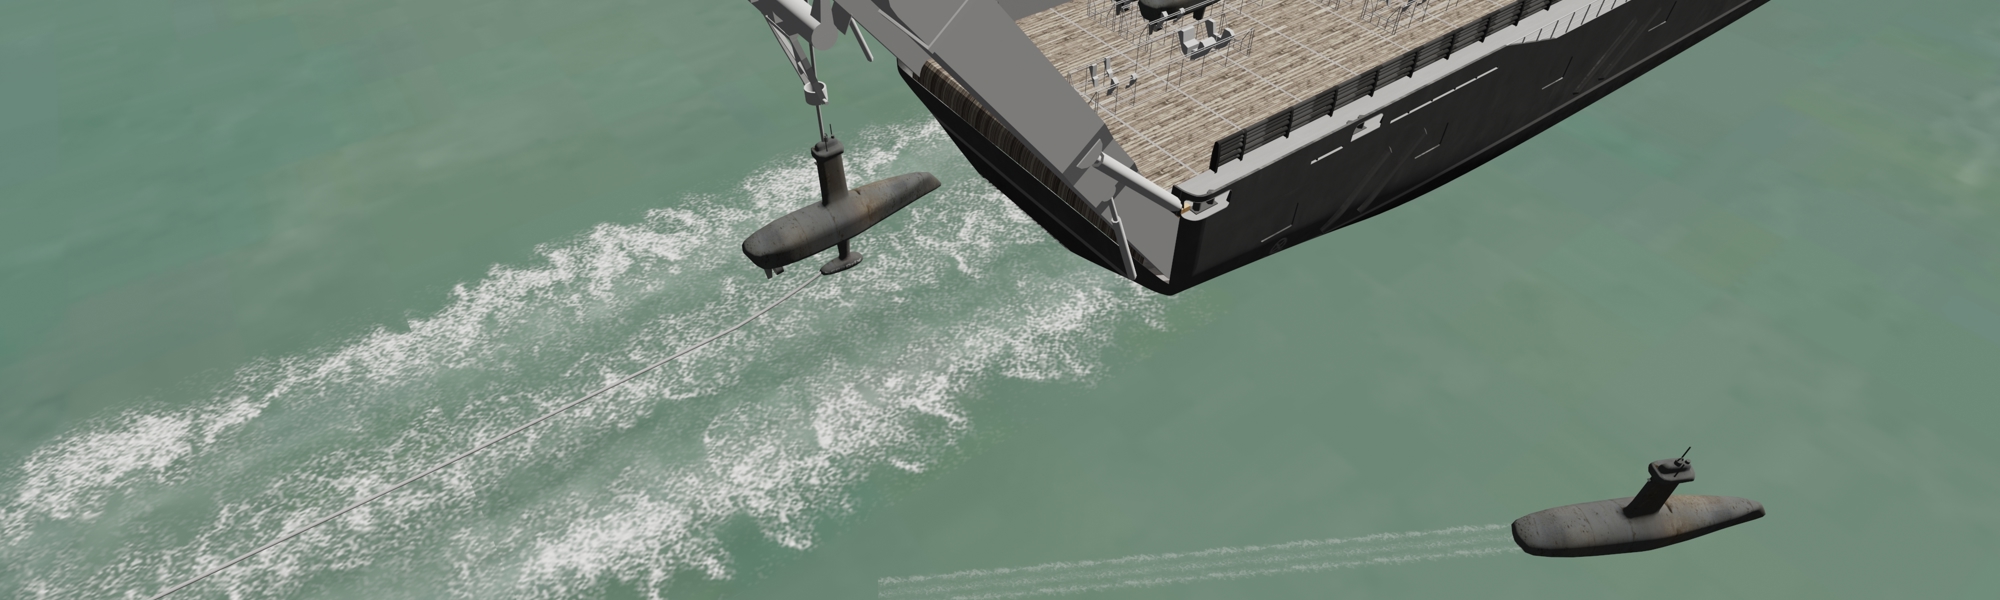 SEA Partners with iXblue to Deliver Long Range, Long Endurance Submarine Hunting System